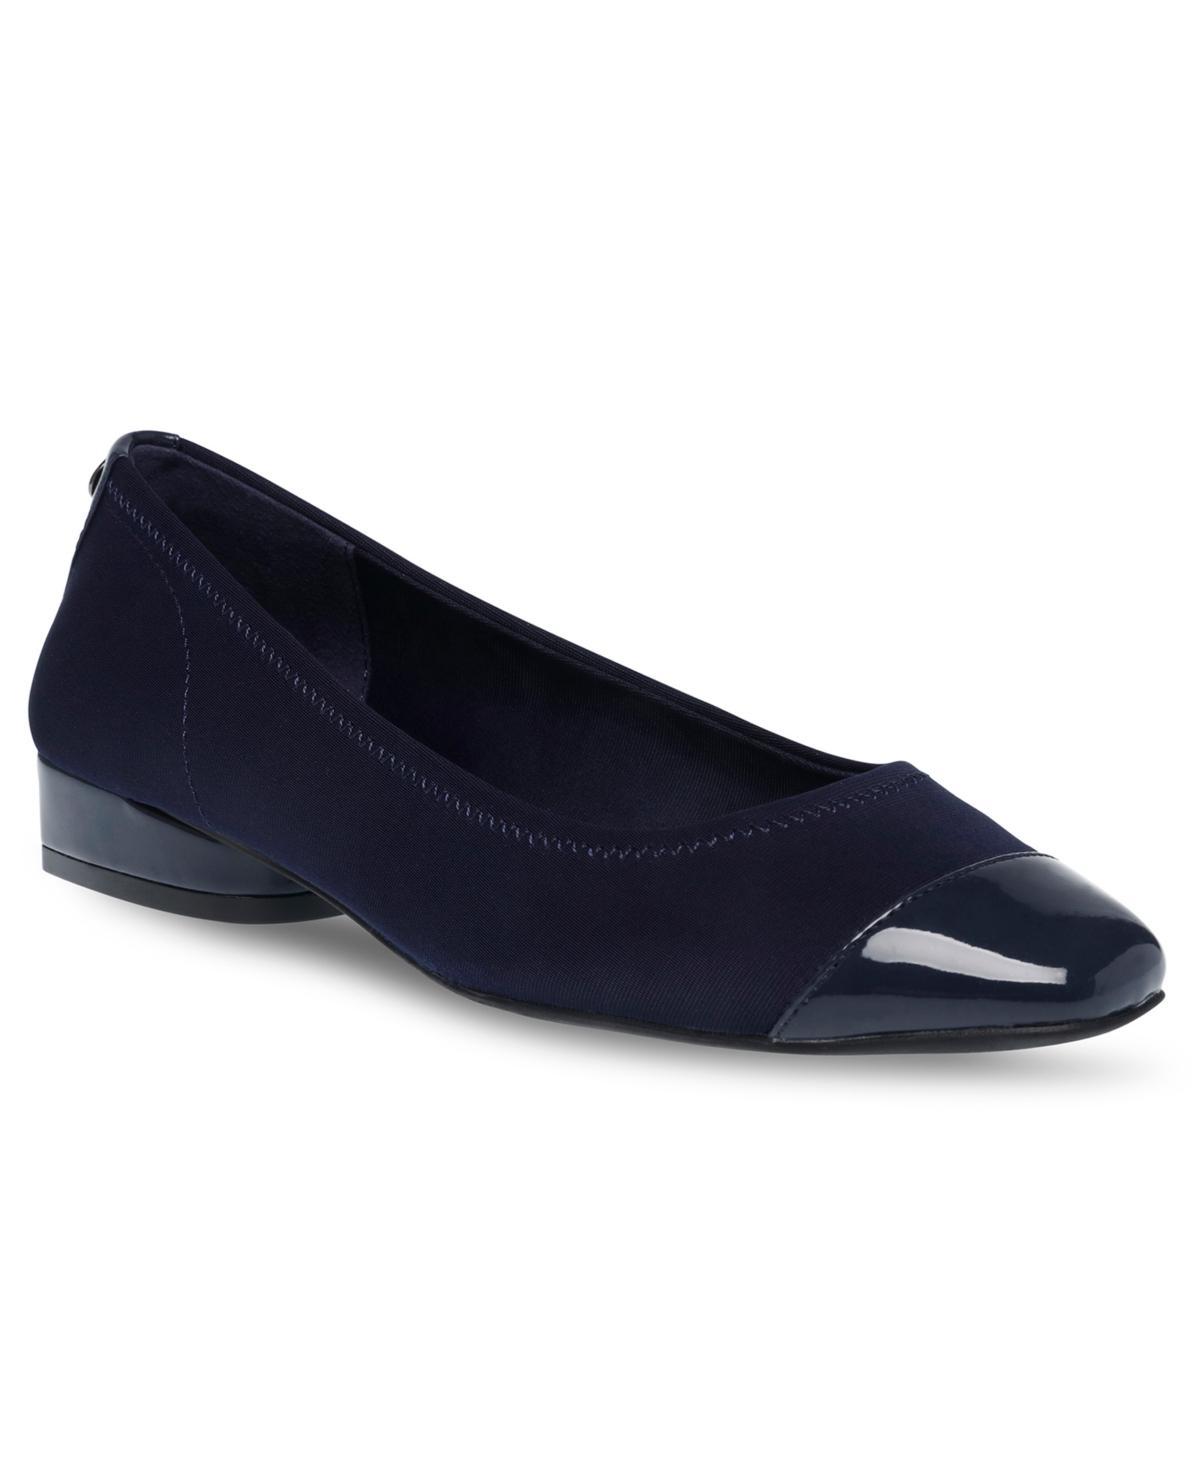 Anne Klein Carlie Flat Product Image